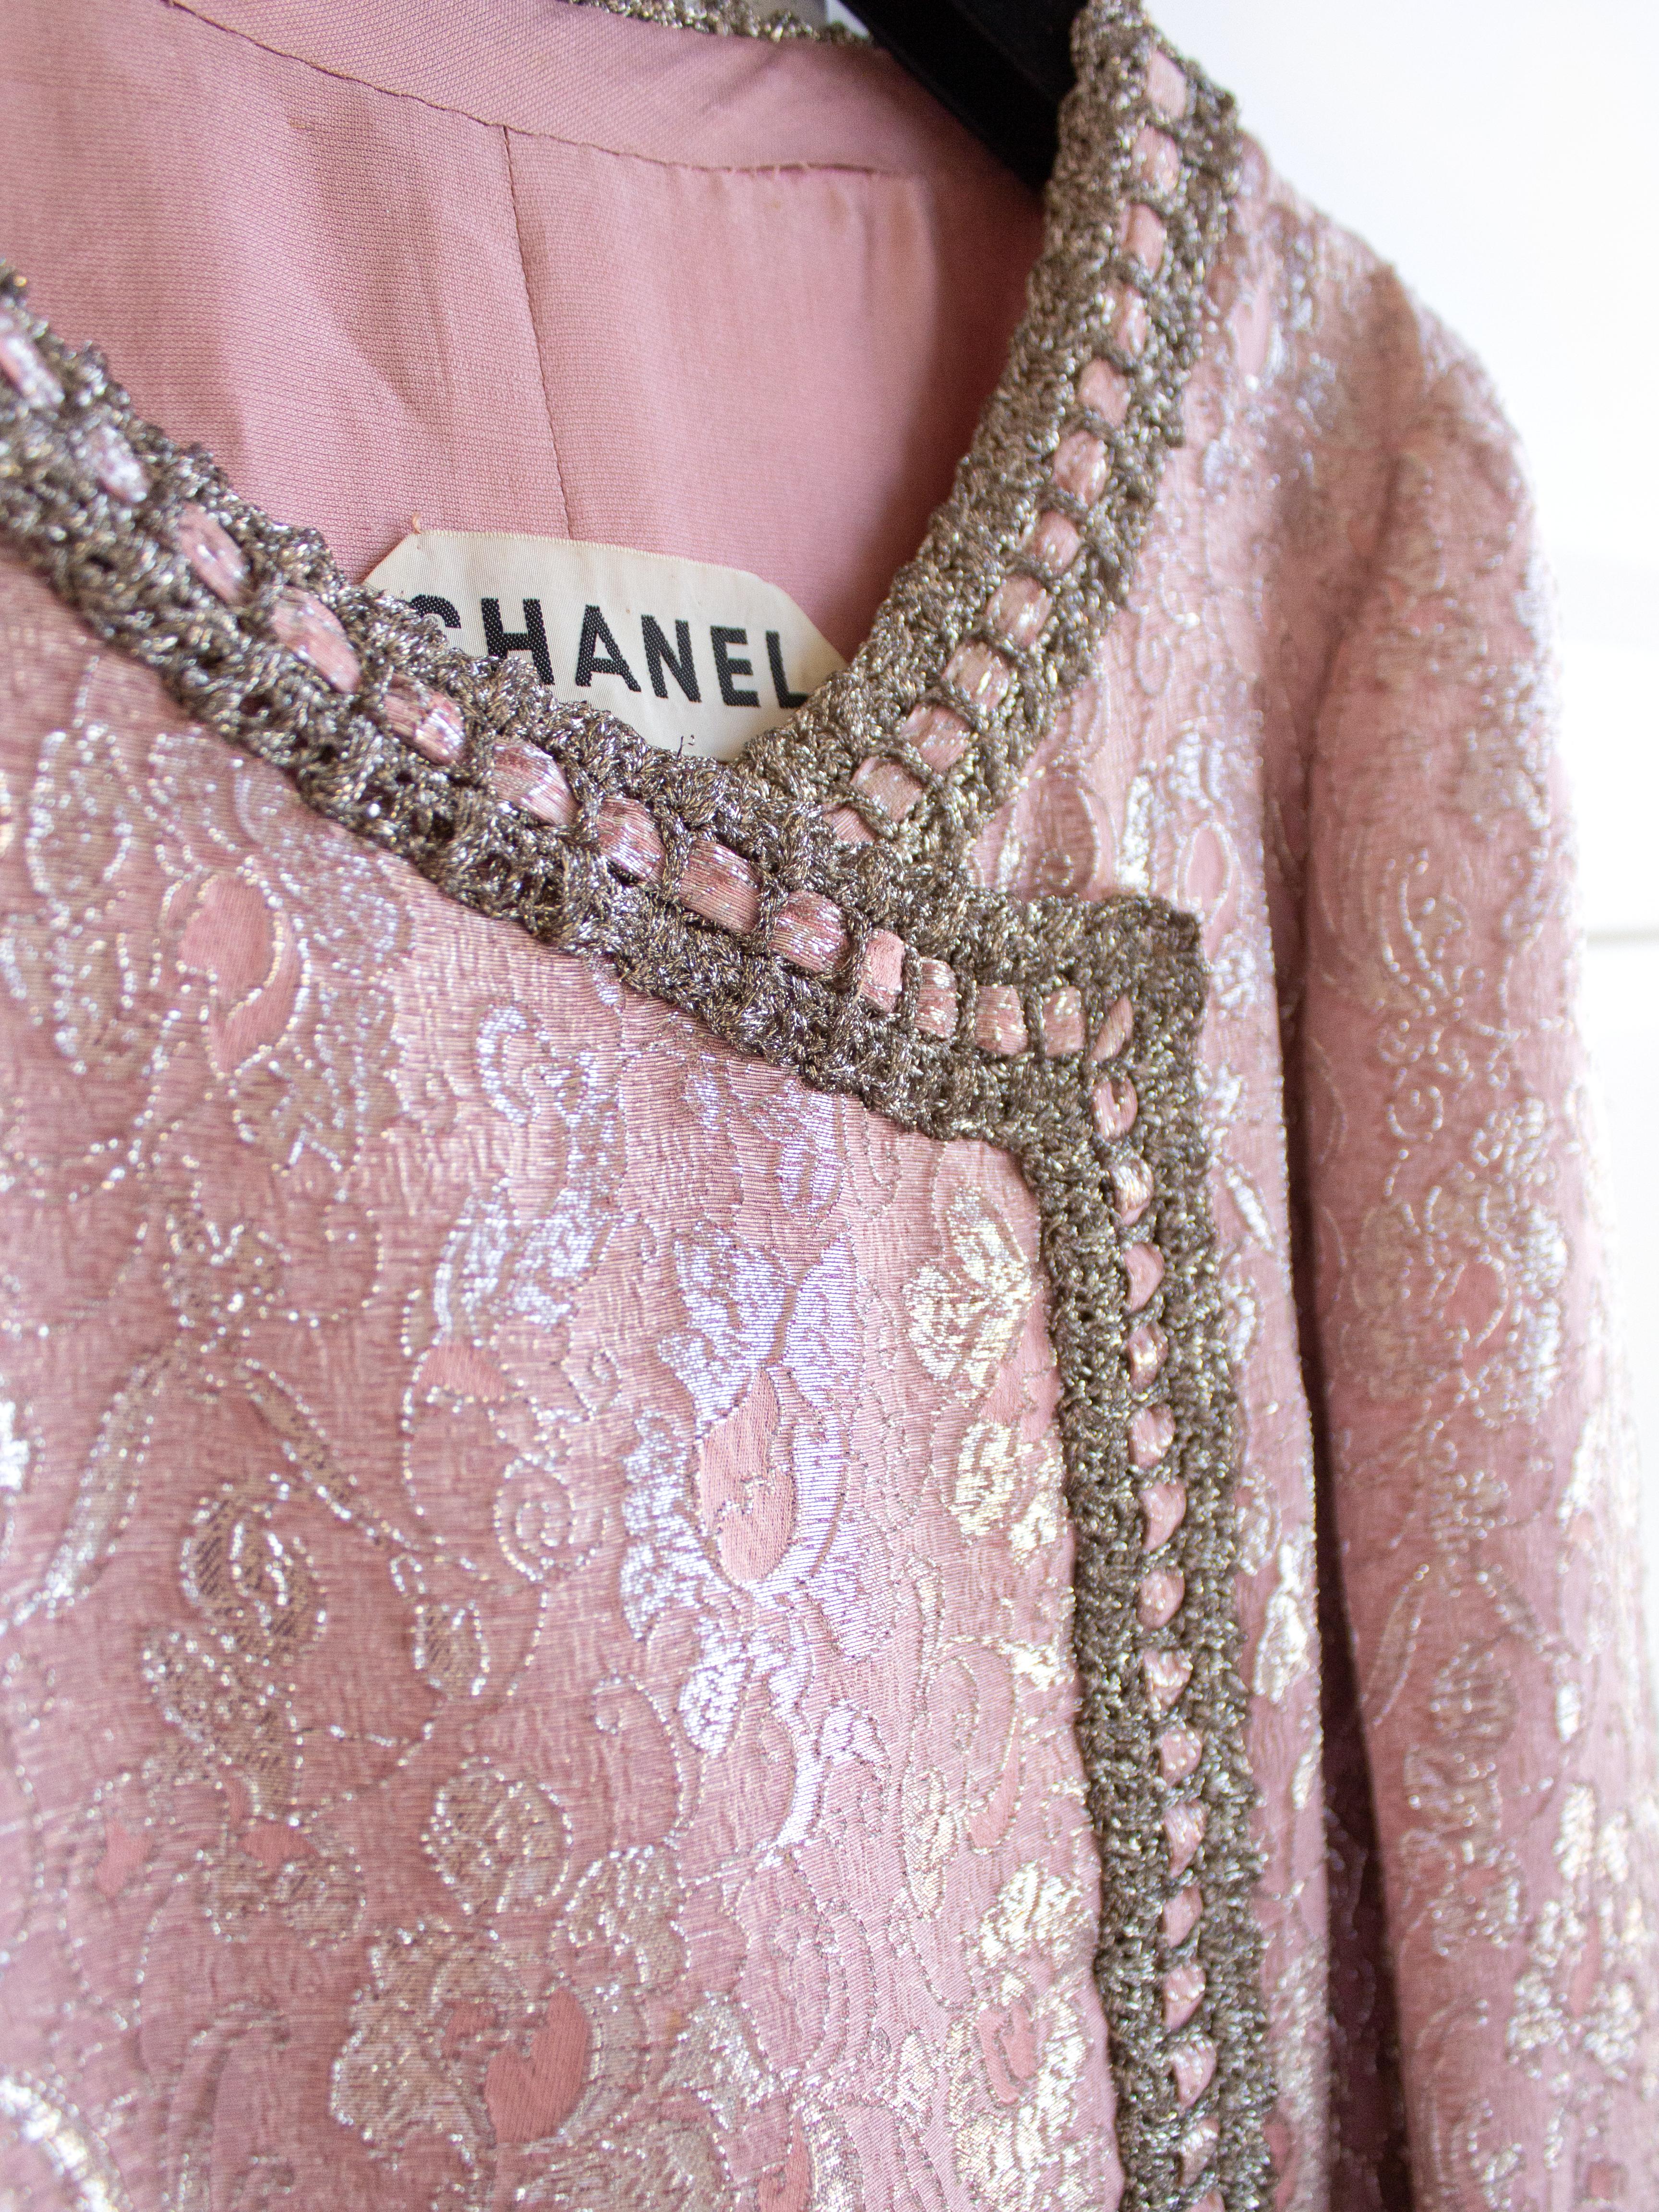 Chanel Vintage Haute Couture 1960s Pink Silver Braided Brocade Jacket Skirt Suit 5